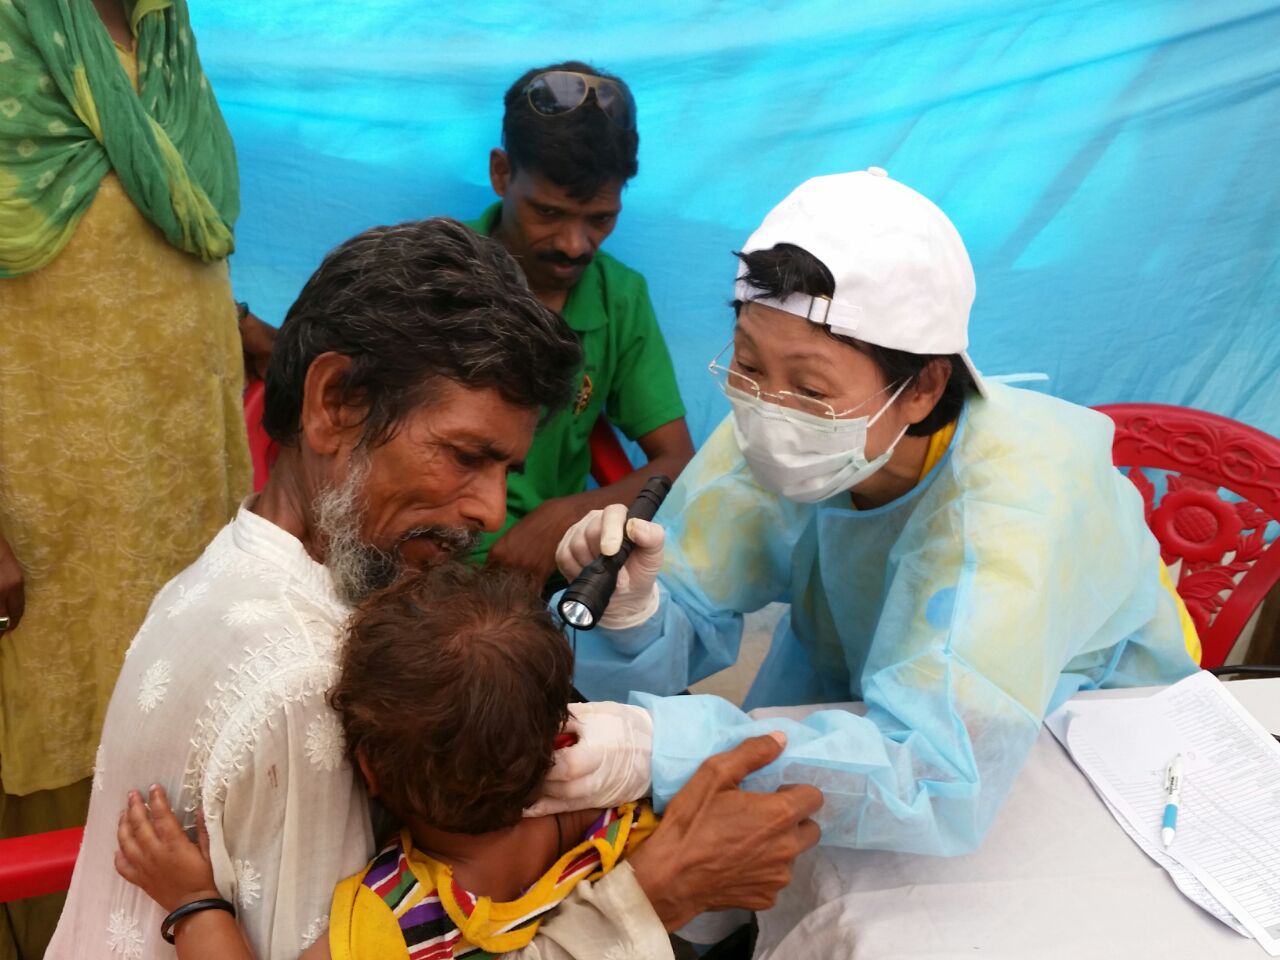 Yvonne serving at a medical camp in South Asia.Photo by Yvonne Huang